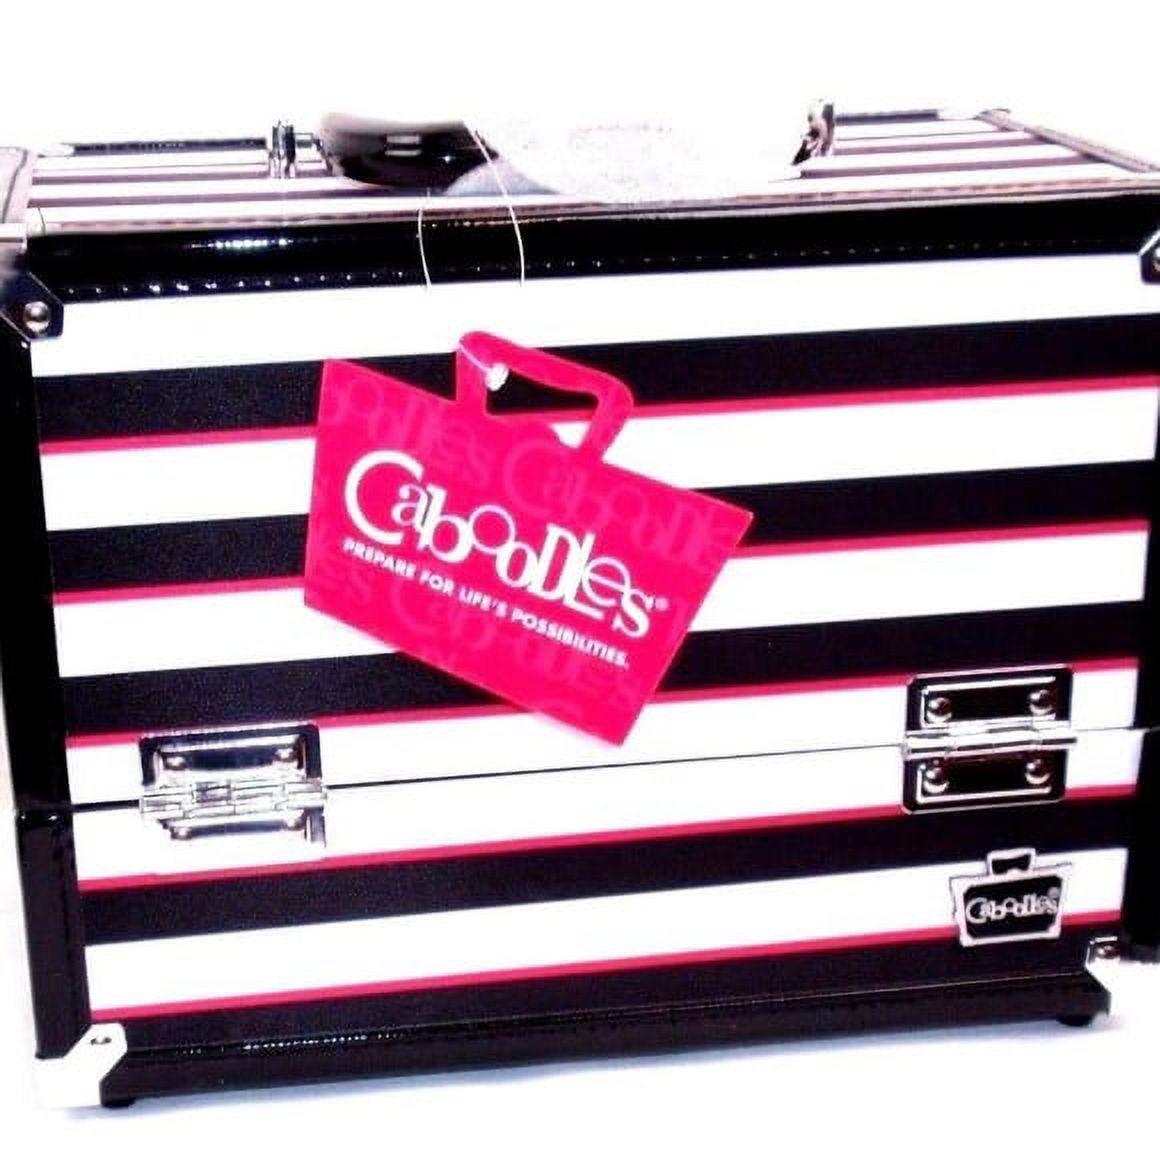 Caboodles Inspired Makeup Case, 2 Tray, Multi Color Striped - image 2 of 7